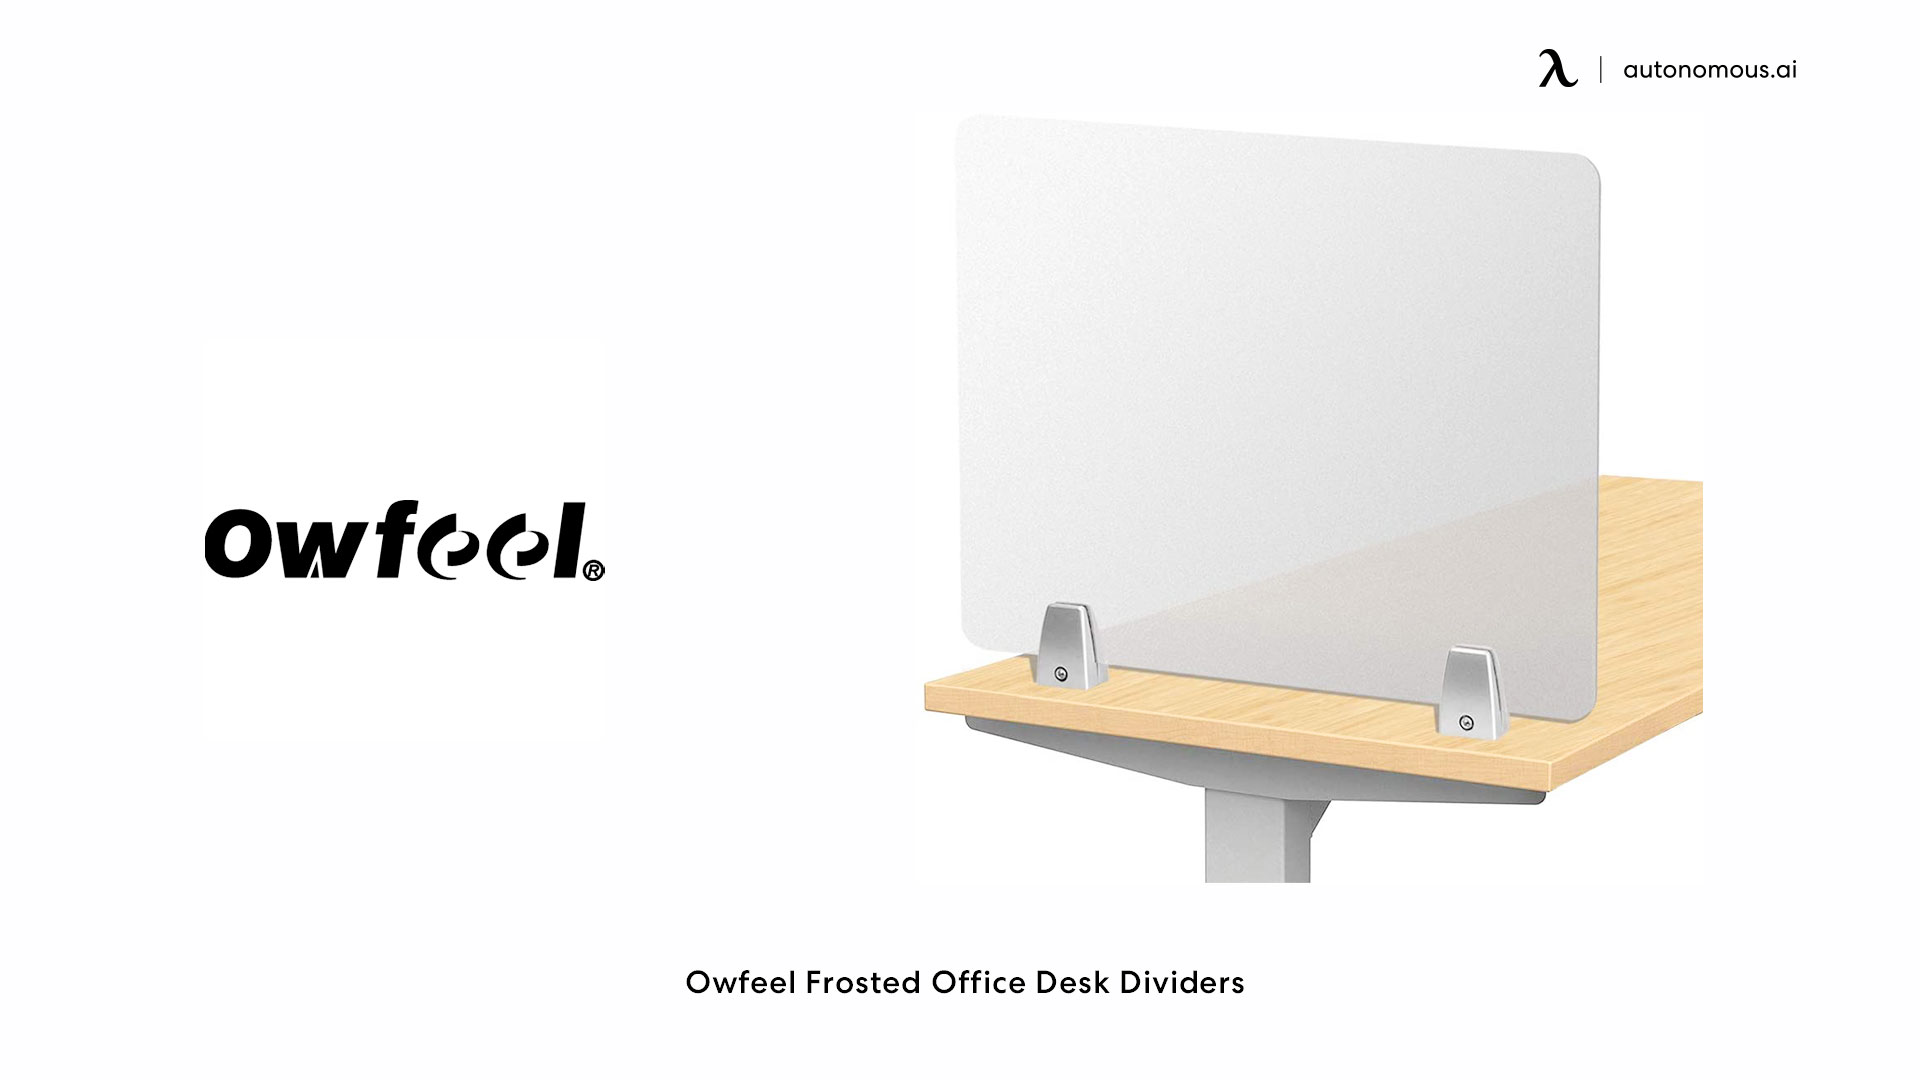 Owfeel Frosted Office Desk Dividers